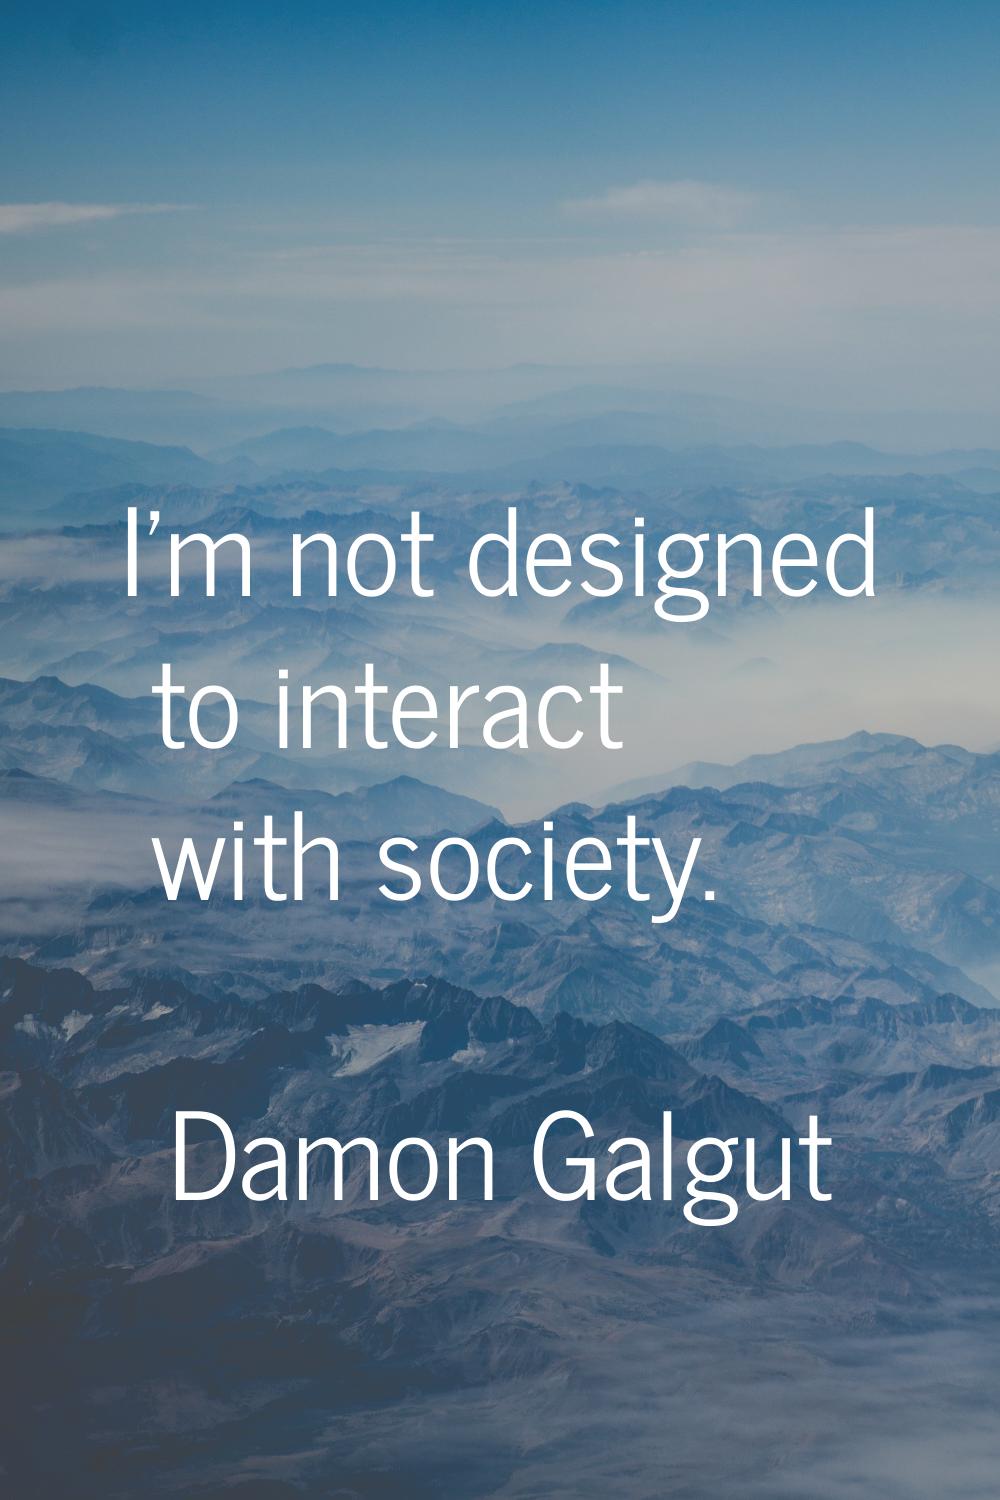 I'm not designed to interact with society.